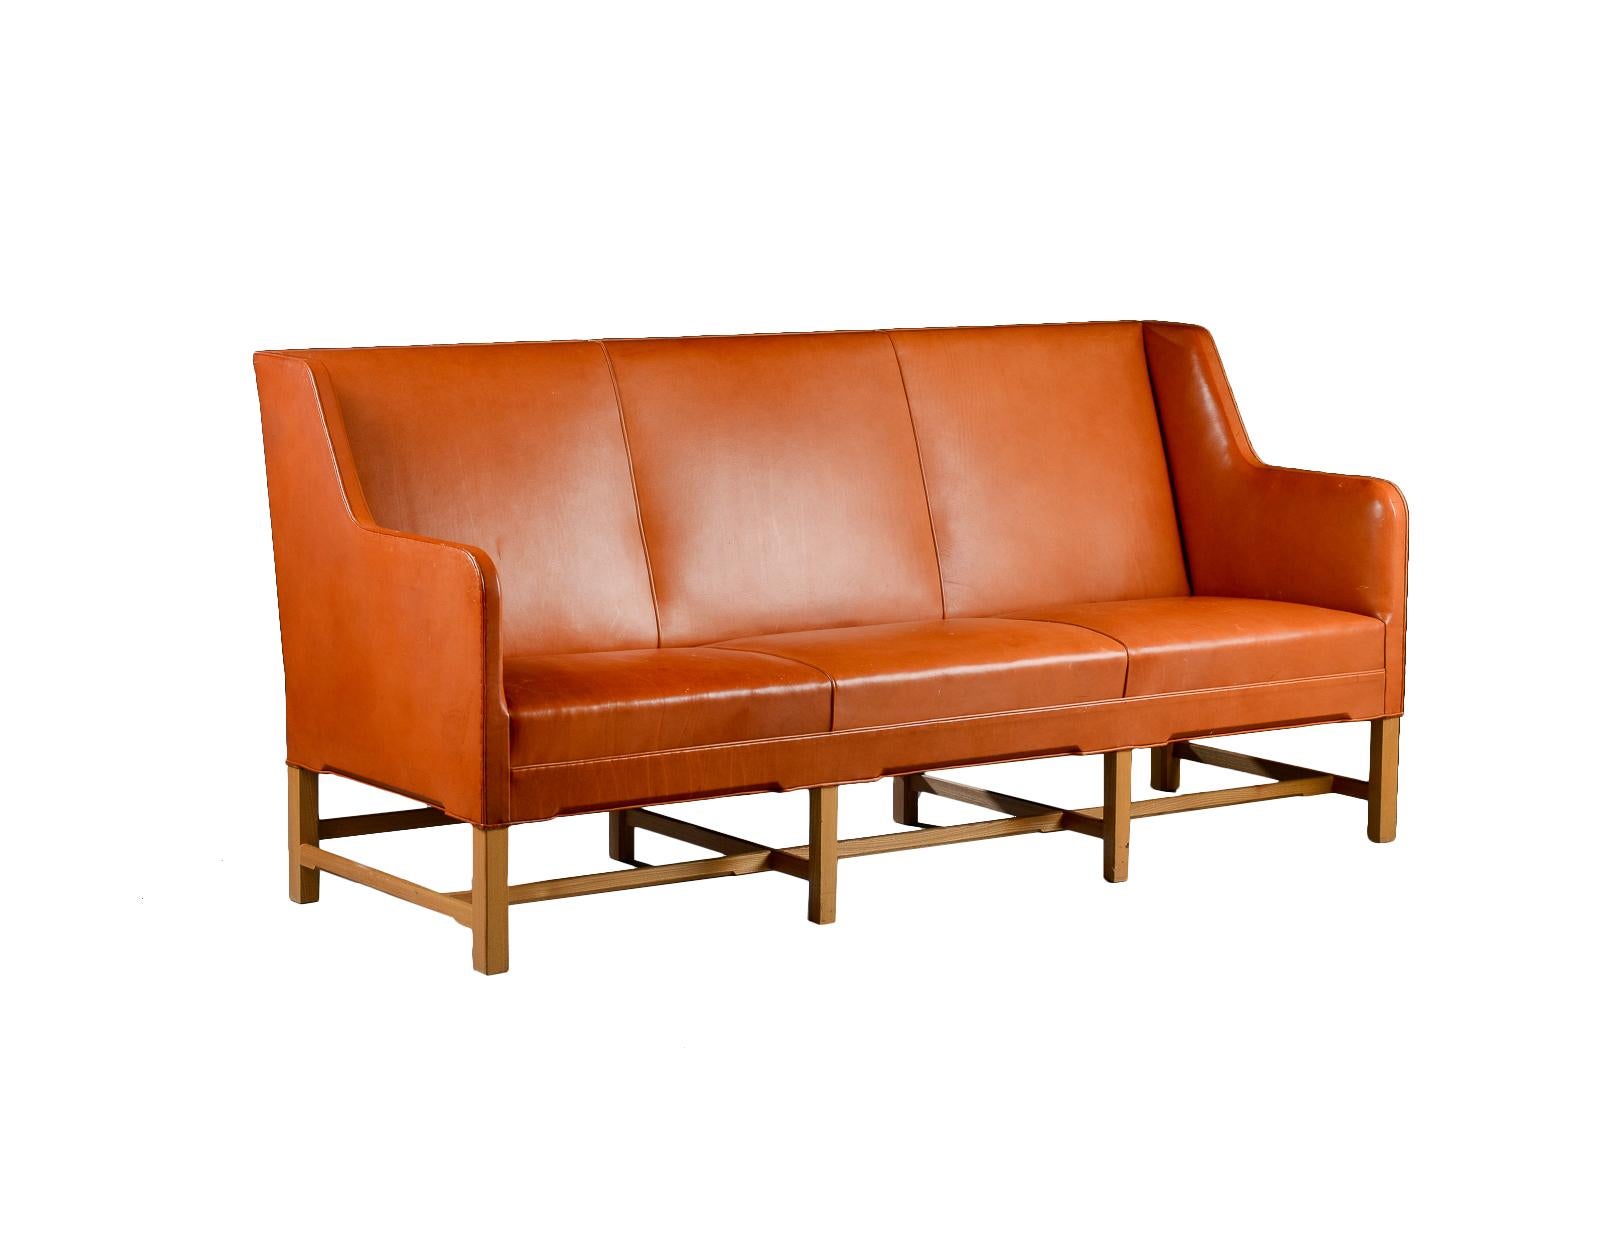 Three-seater sofa model 5011 in original leather and eight-legged ash base. Produced by Rud. Rasmussen Cabinetmakers, Denmark. Minor marks on the frame, patina to the leather.
Shown at the Copenhagen Cabinetmakers’ Guild exhibition in